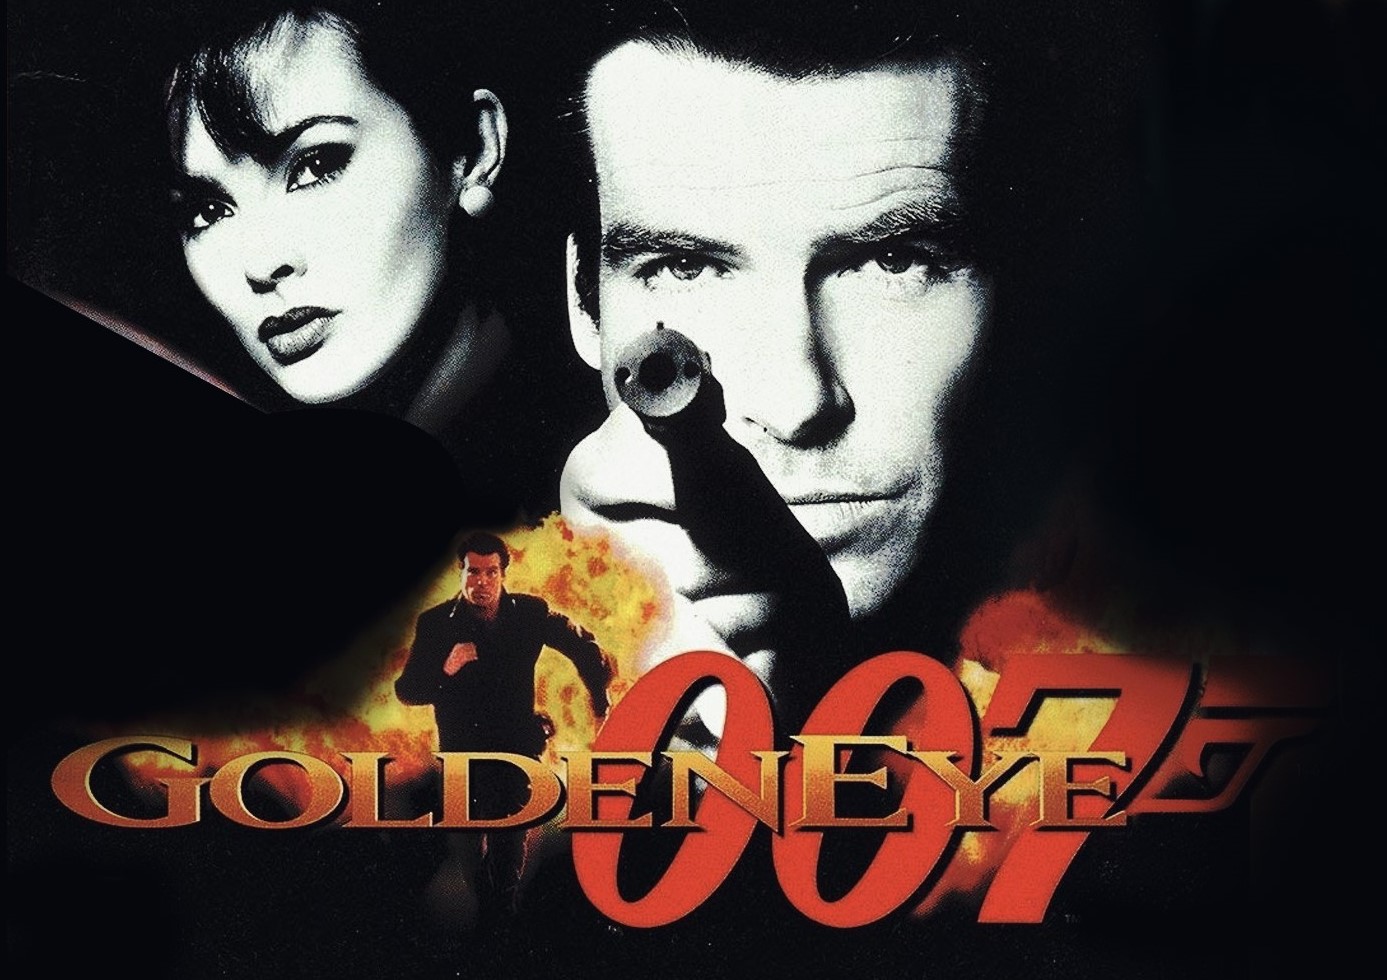 New achievements suggest 007 GoldenEye remaster coming to Xbox